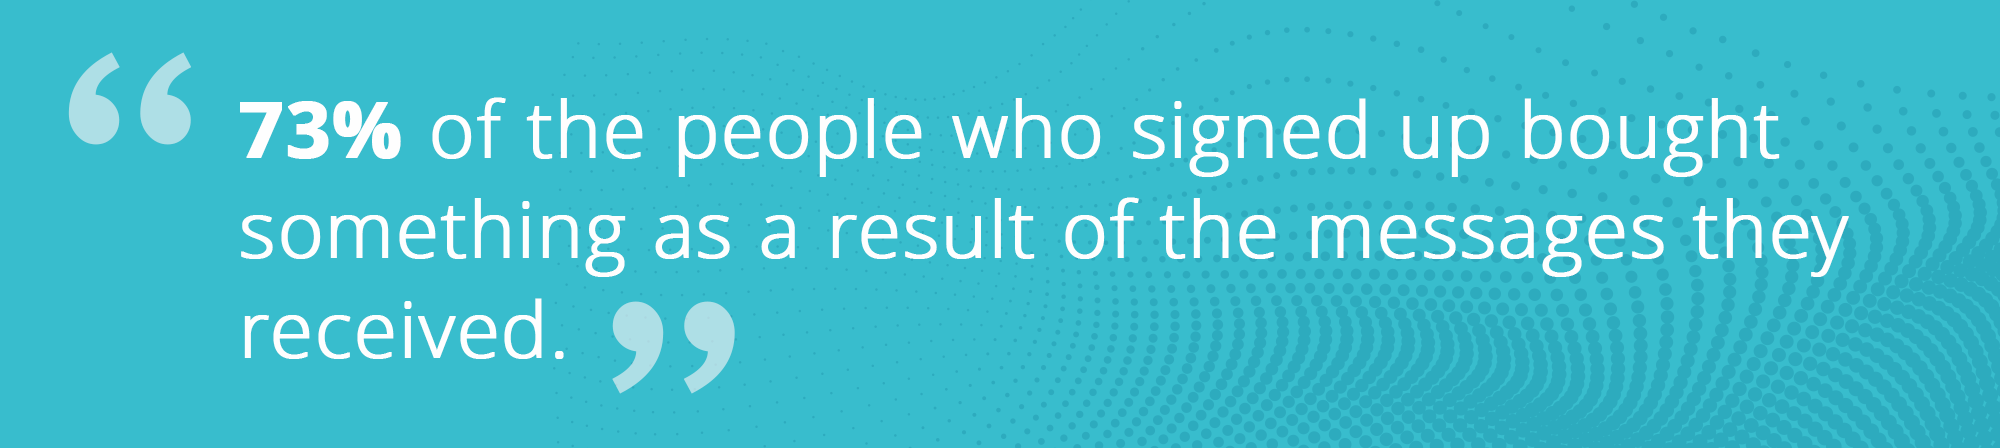 73% of the people who signed up bought something as a result of the messages they received. call out graphic